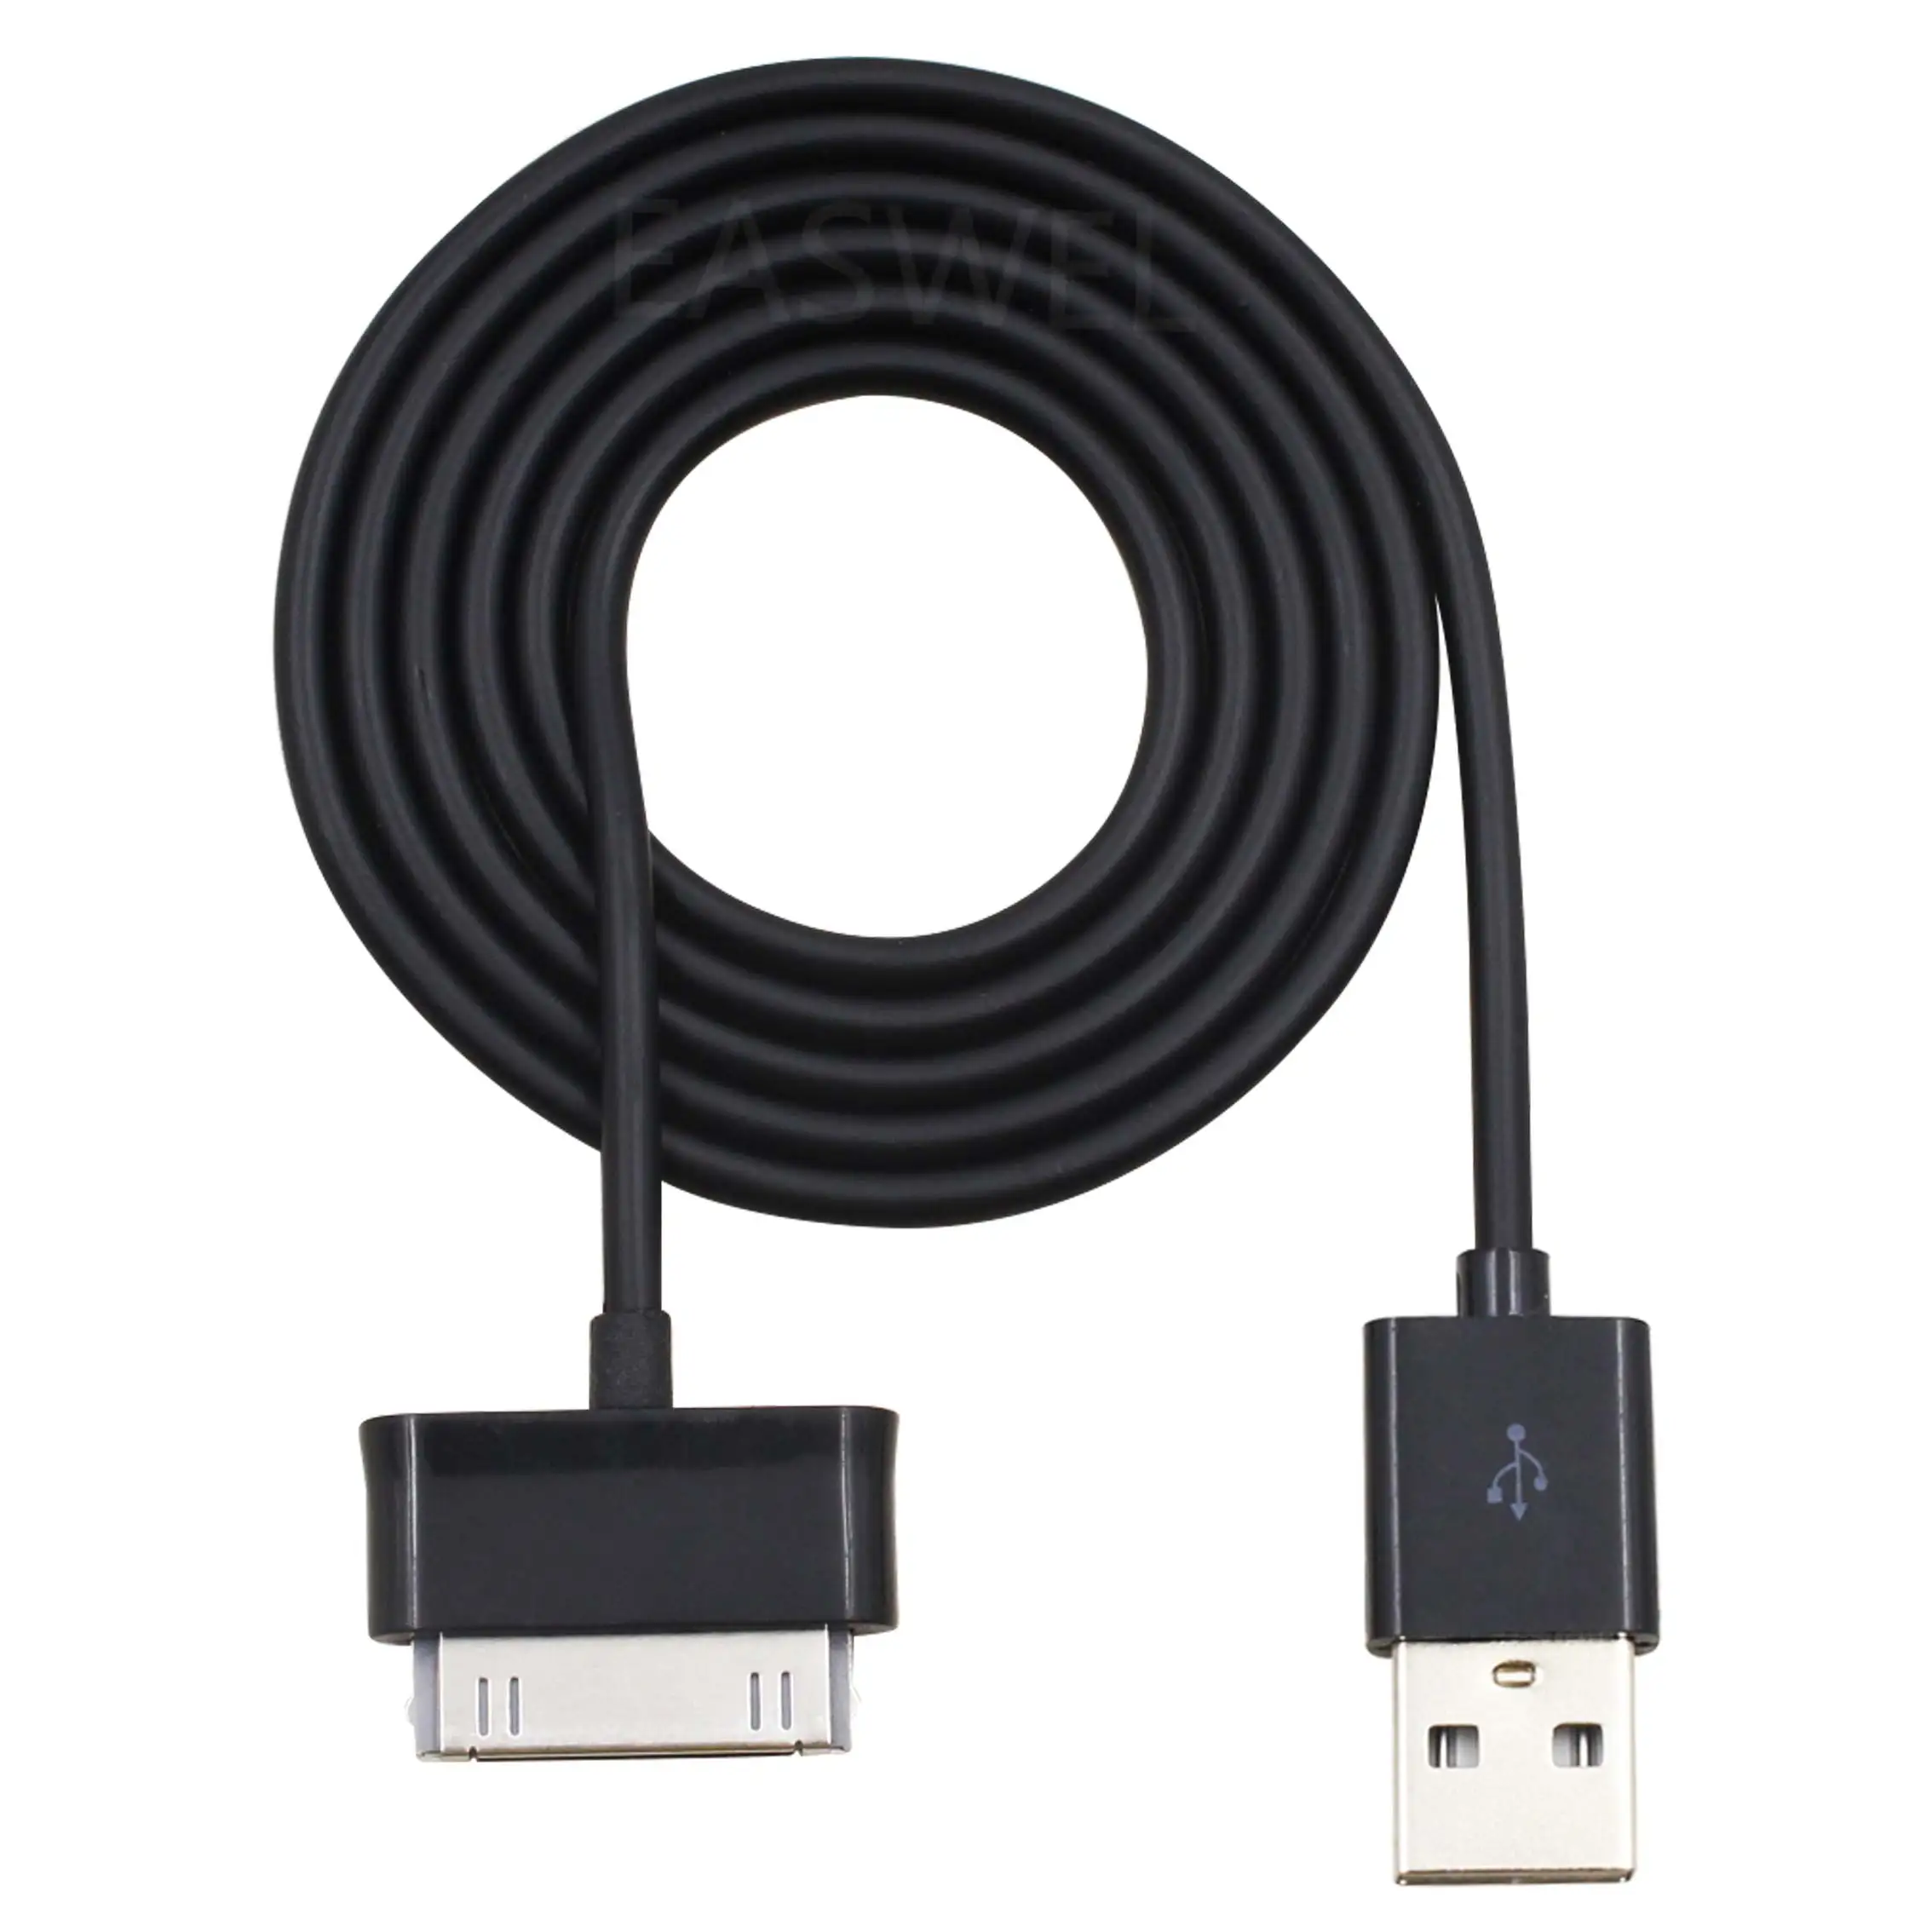 GSParts USB Data Charger Cable Cord Wire for Samsung Galaxy Tab2 Tab 2 GT-P3113TS Tablet 